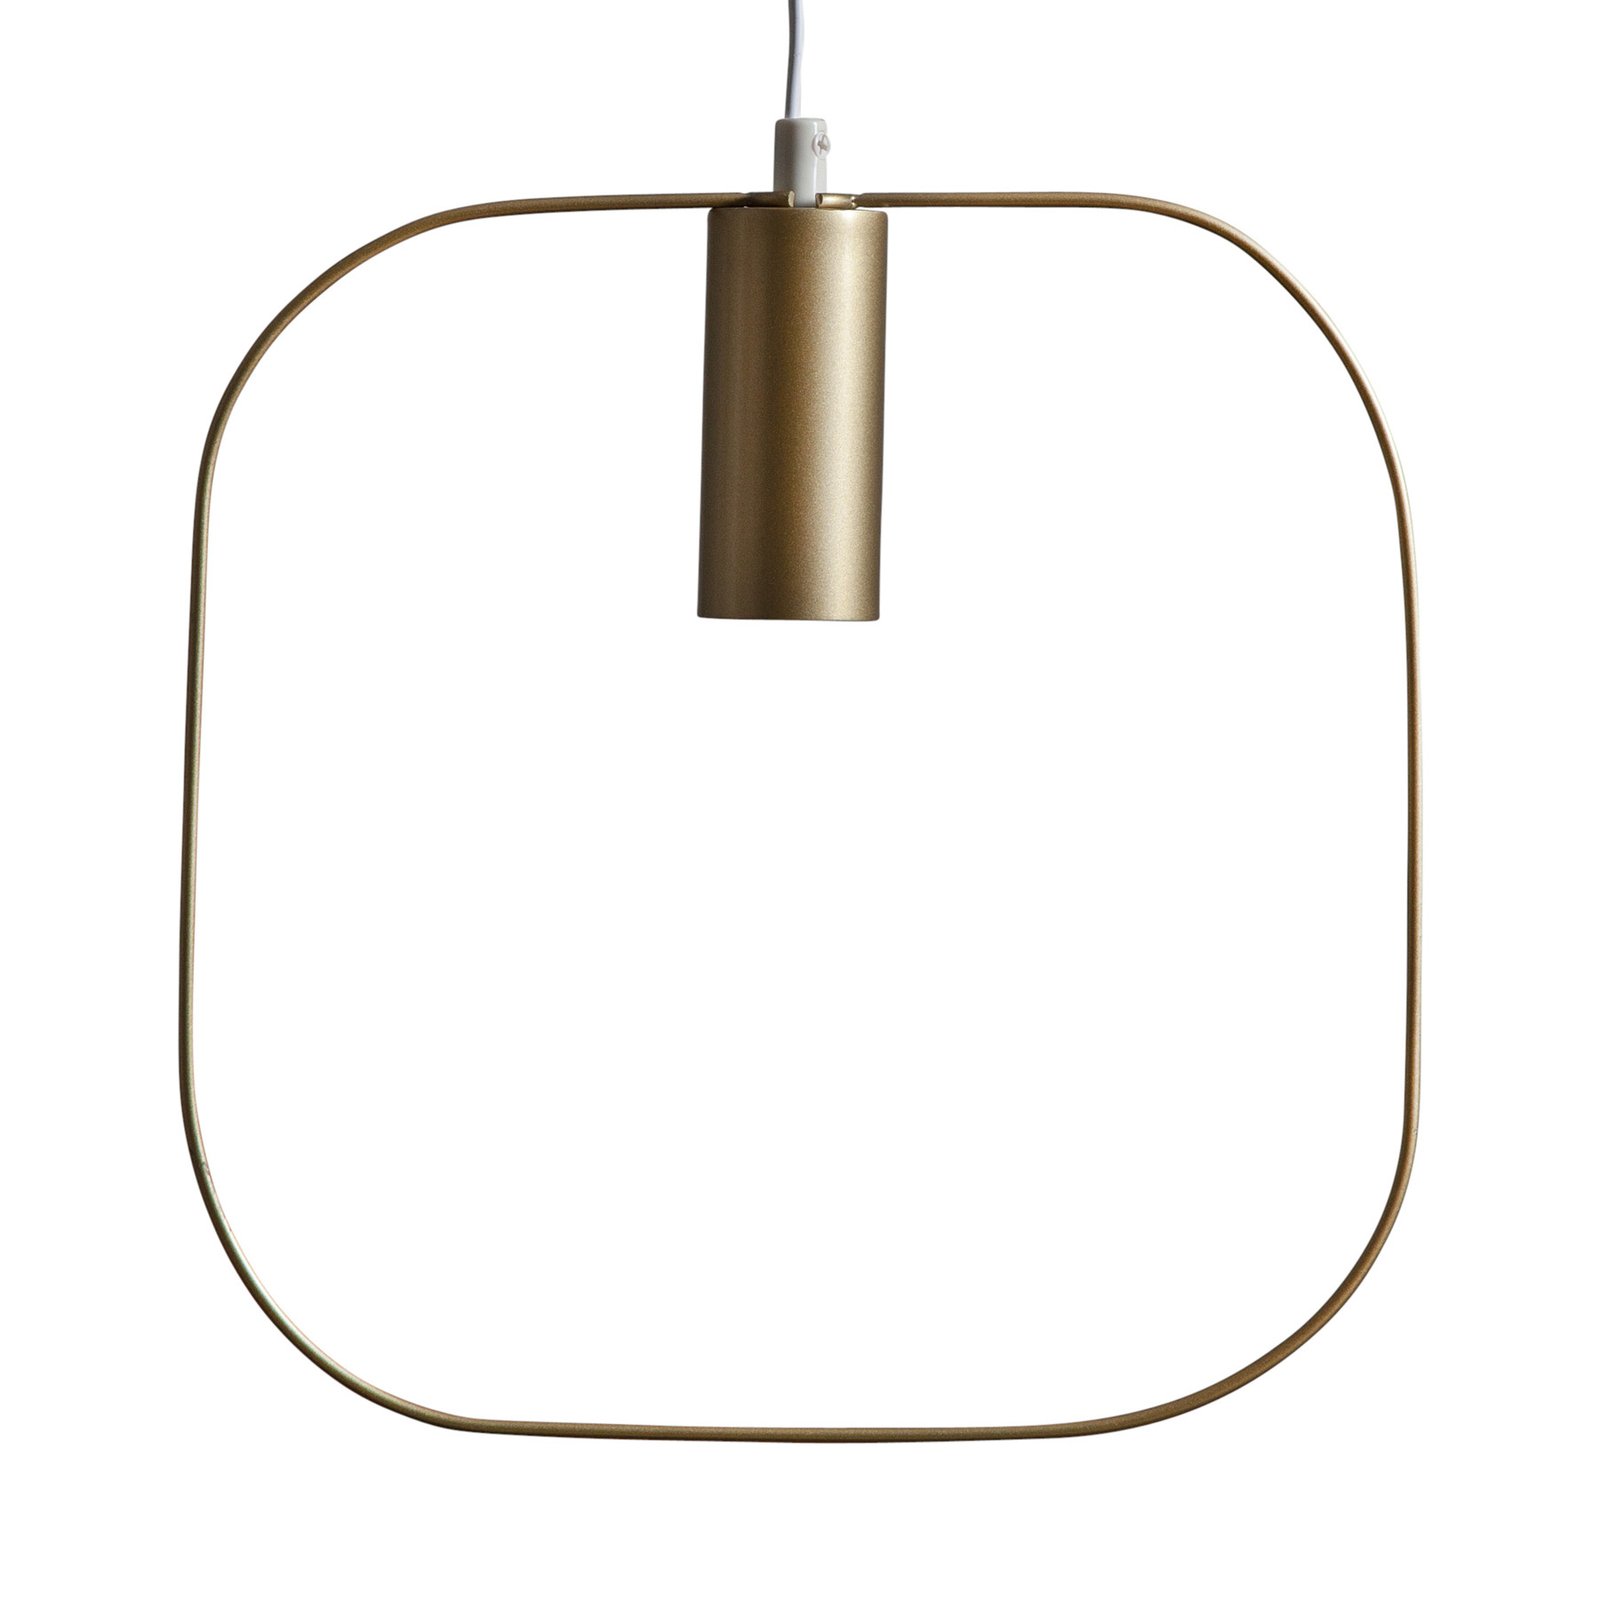 Shape decorative hanging light with square, gold